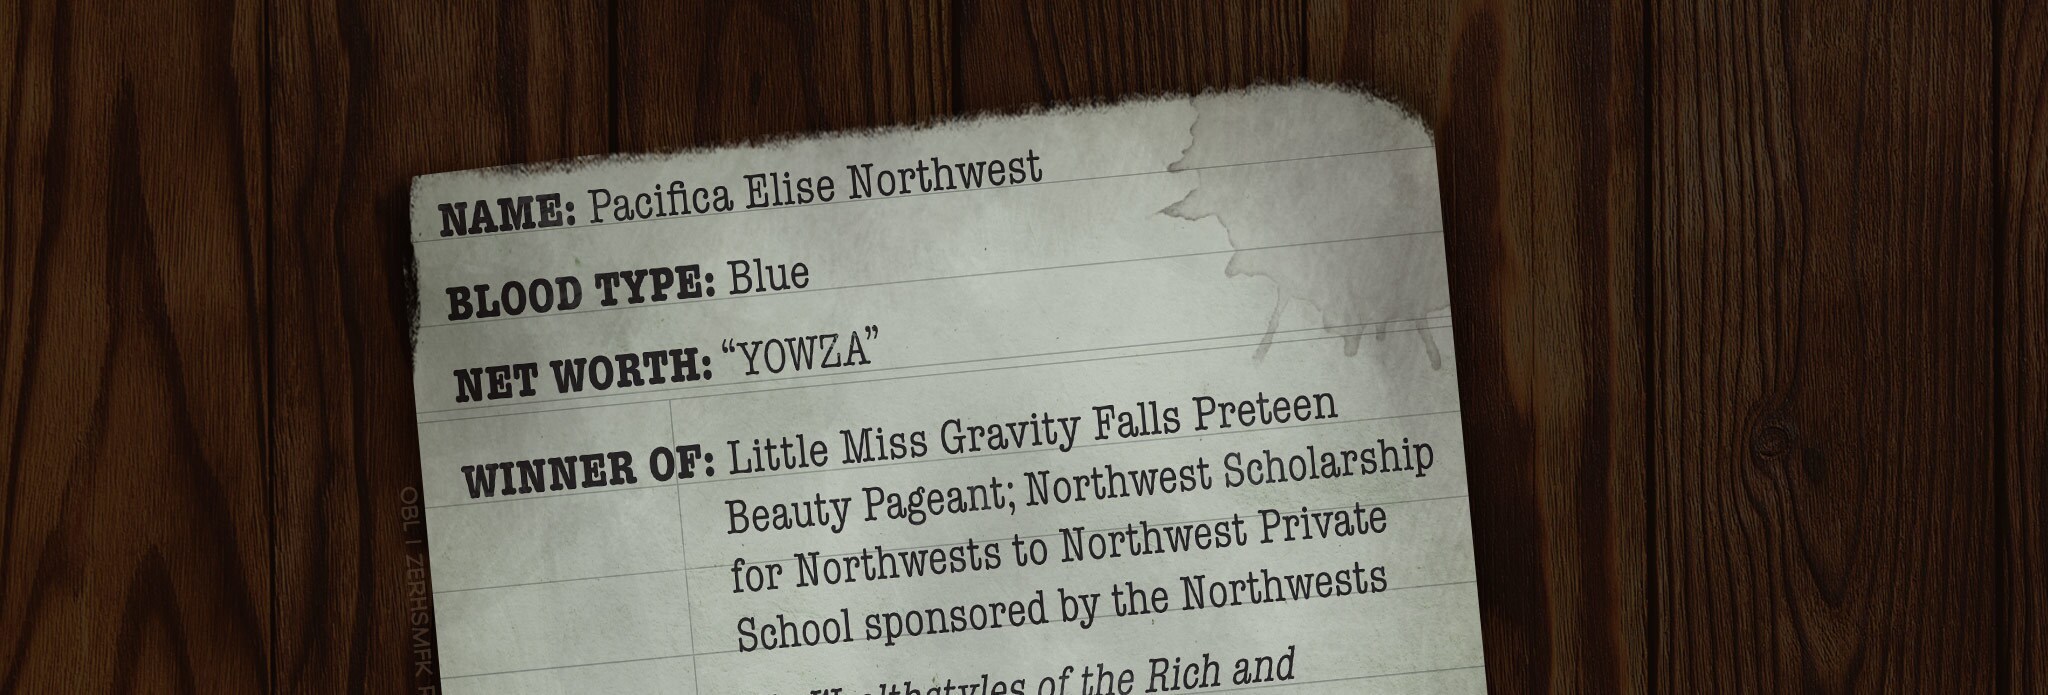 NAME: Pacifica Elise Northwest BLOOD TYPE: Blue NET WORTH: “YOWZA” WINNER OF: Little Miss Gravity Falls Preteen Beauty Pageant; Northwest Scholarship for Northwests to Northwest Private School sponsored by the Northwests FEATURED ON: Wealthstyles of the Rich and Cashulous on the Jealousy Network HOBBIES: Mini golf; beauty pageants; pony stacking; foxhunting (It’s actually just Toby Determined dressed as a fox. No one knows why he does this.) SECRET HOBBIES: Is a level 100 DeathSlayer on first-person shooter game Bloodcraft: Overdeath. Plays as “PLATINUMPAZ.” Is also secretly good at puns, but tells no one. NATURAL HAIR COLOR: Inconclusive. Mabel was once heard to remark, “Your parents are both brunettes. Let’s get real, girl.” FAVORITE FOOD: Pheasant stuffed with lobster stuffed with ravioli stuffed with only the most ironic New Yorker cartoons ACTUAL FAVORITE FOOD: Deep-fried anything